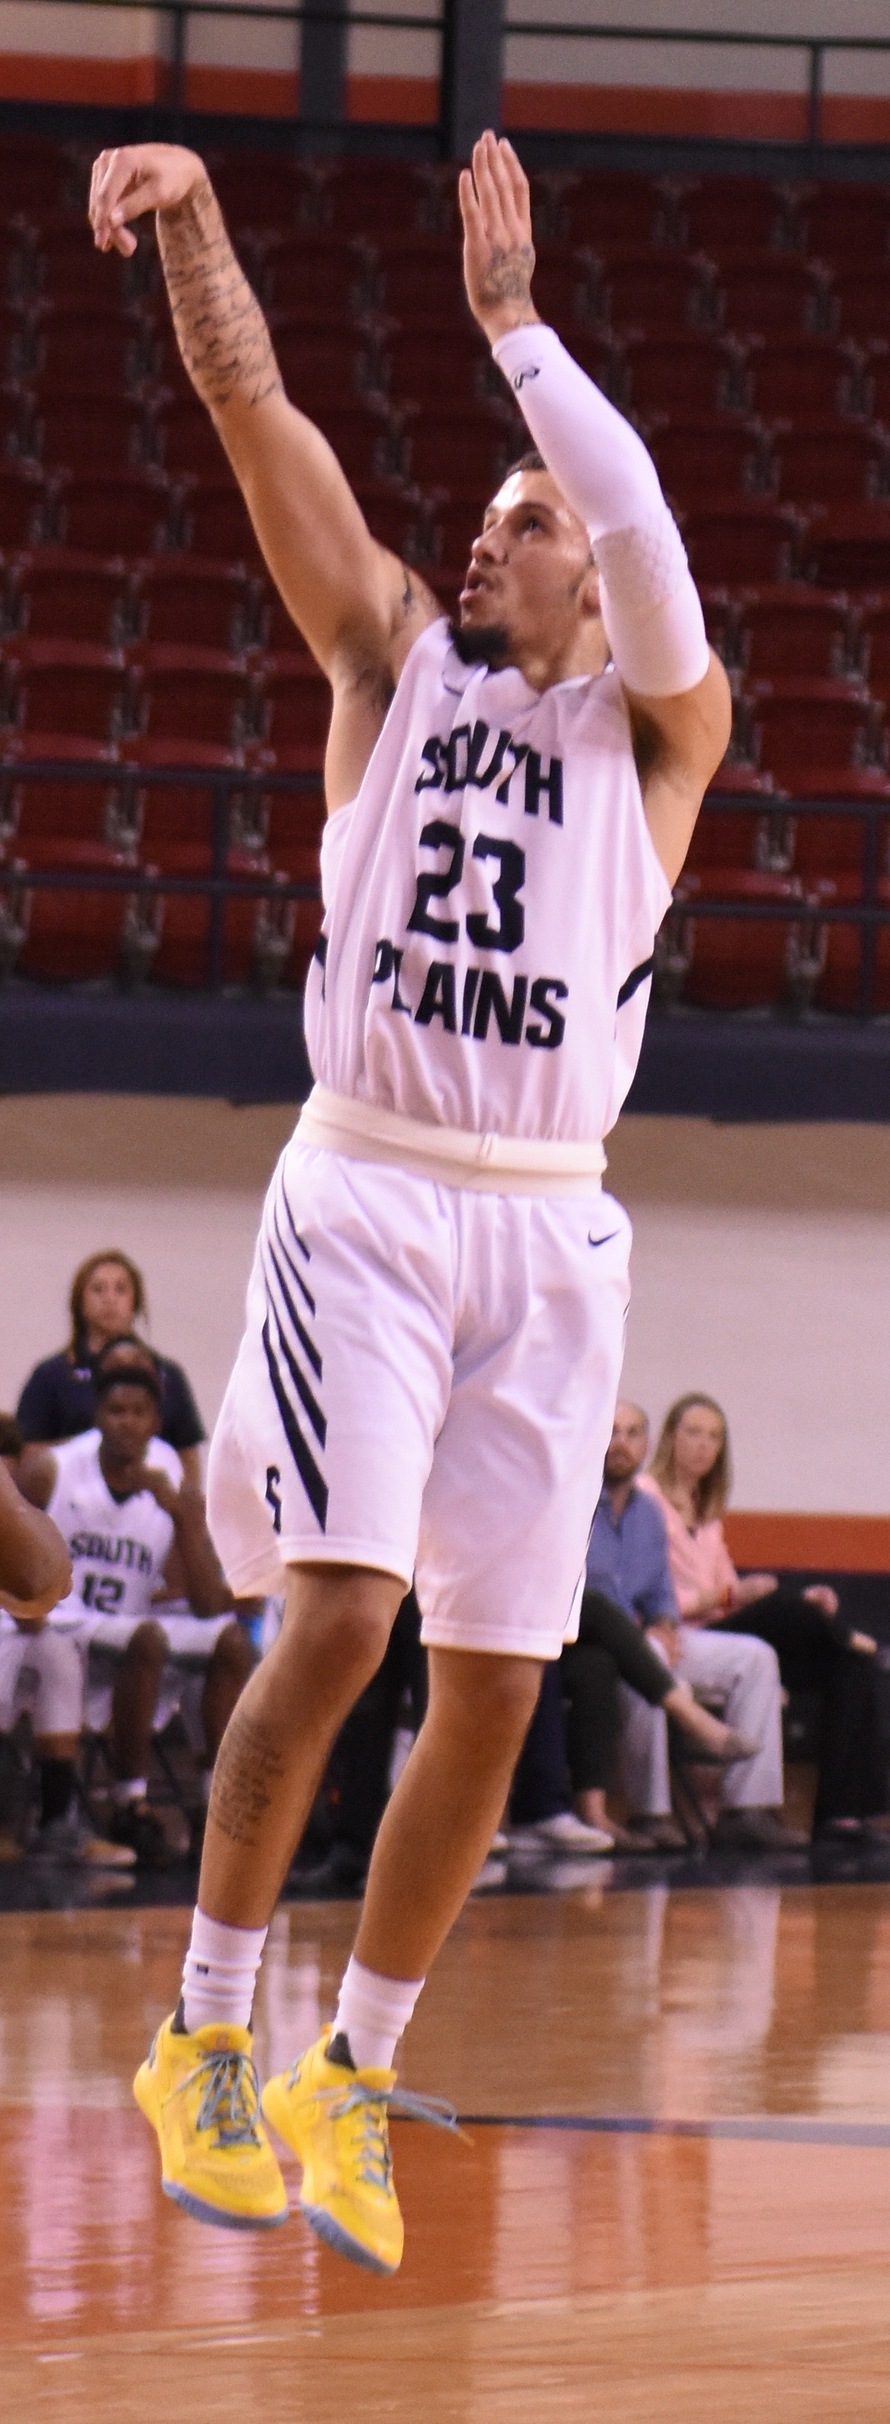 Brangers' career-high 38 points leads Texans past NMMI 108-69 Thursday night